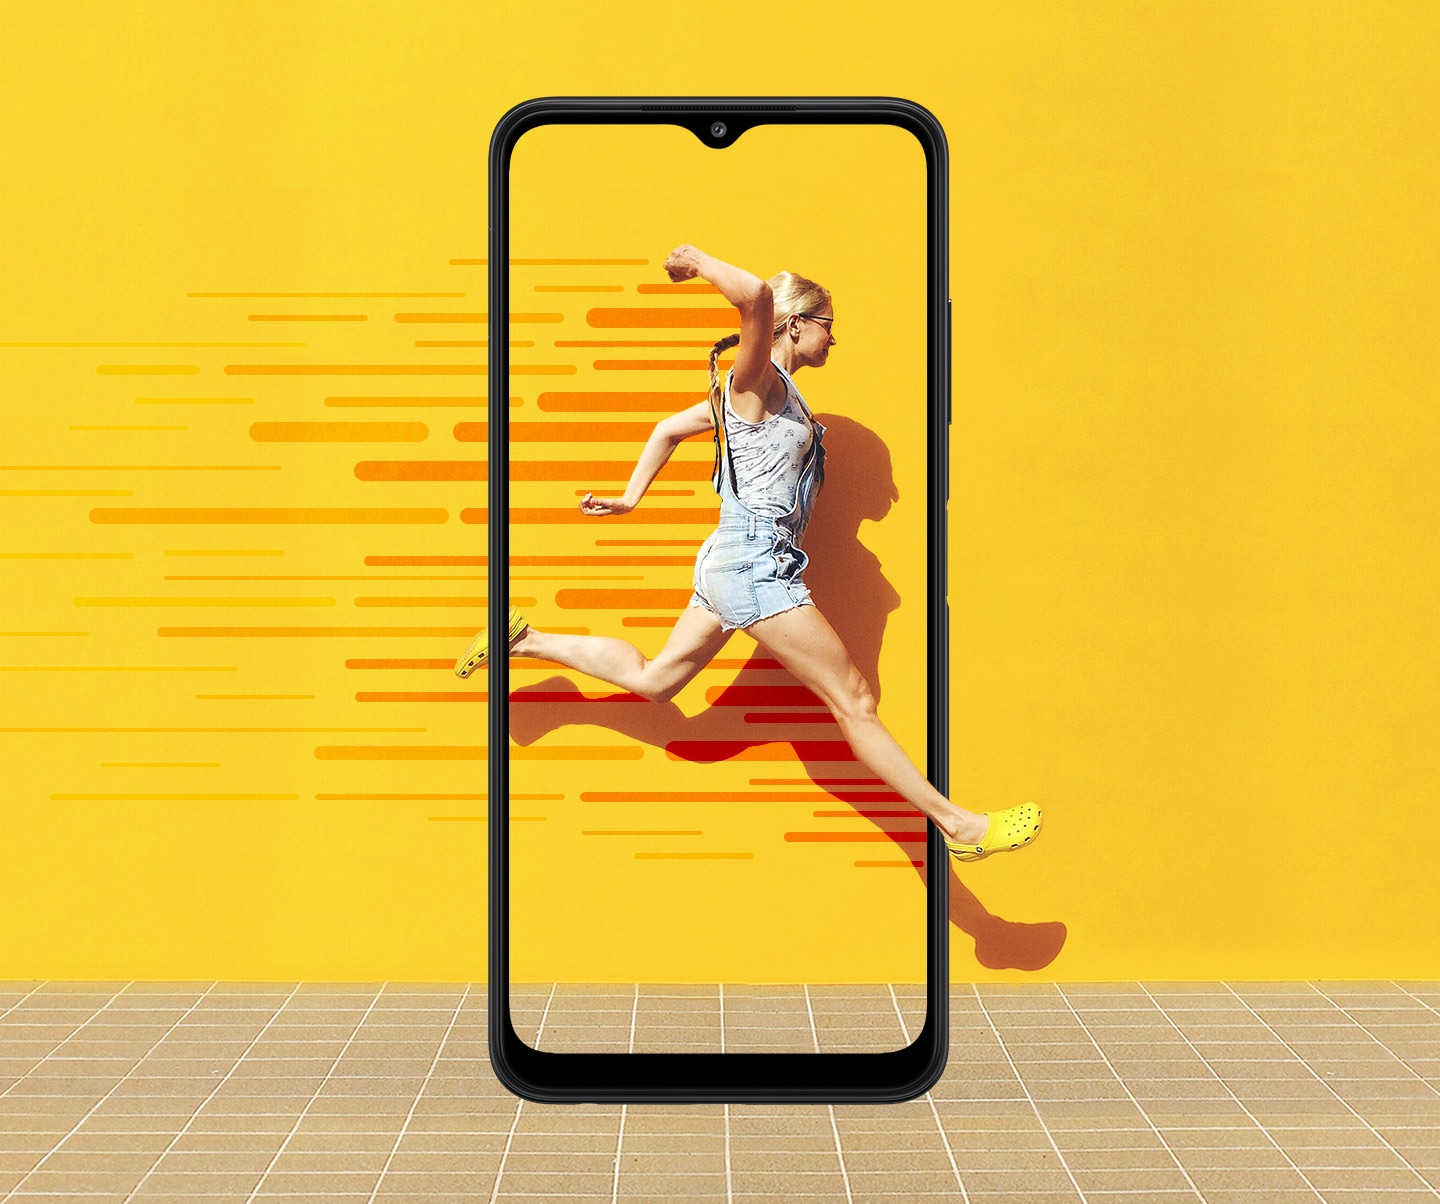 Galaxy A22 5G 6.6-inch Infinity-V Display screen showing a woman leaps forward against a yellow wall, with red lines demonstrating motion. Her movement expands beyond the phone's display.